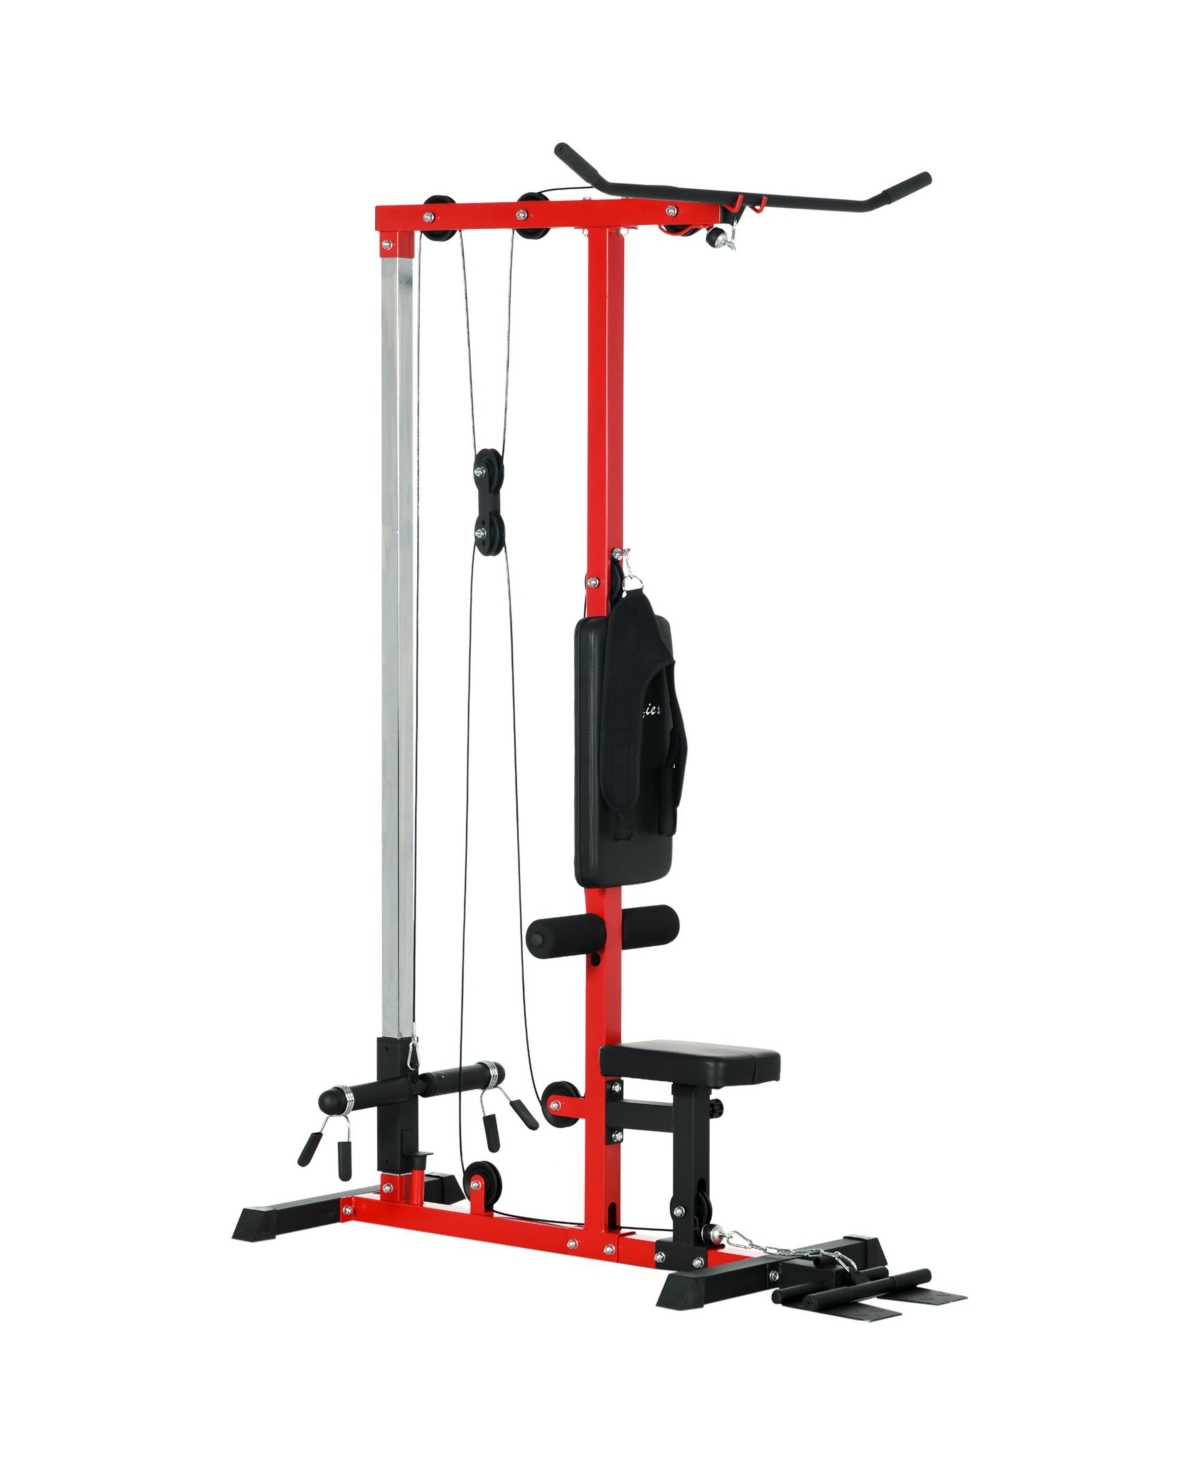 Cable Machine Lat Pull Down Machines with Flip-Up Footplate - Black and red